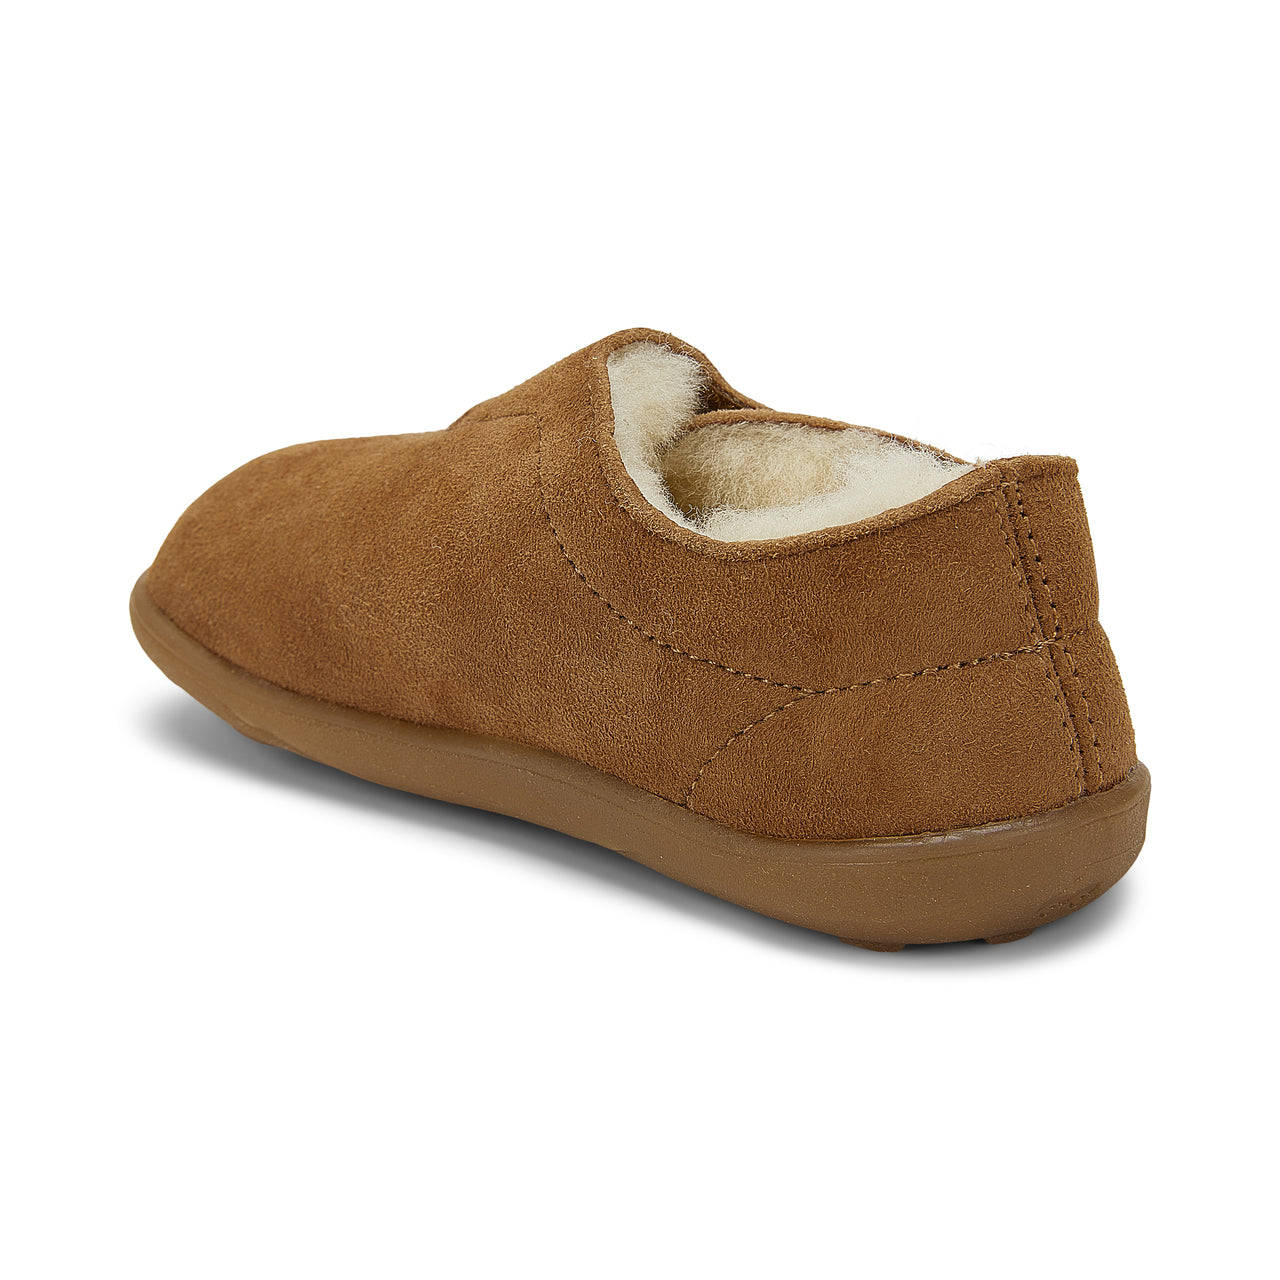 Colby Shearling Slipper Shoe - Brown